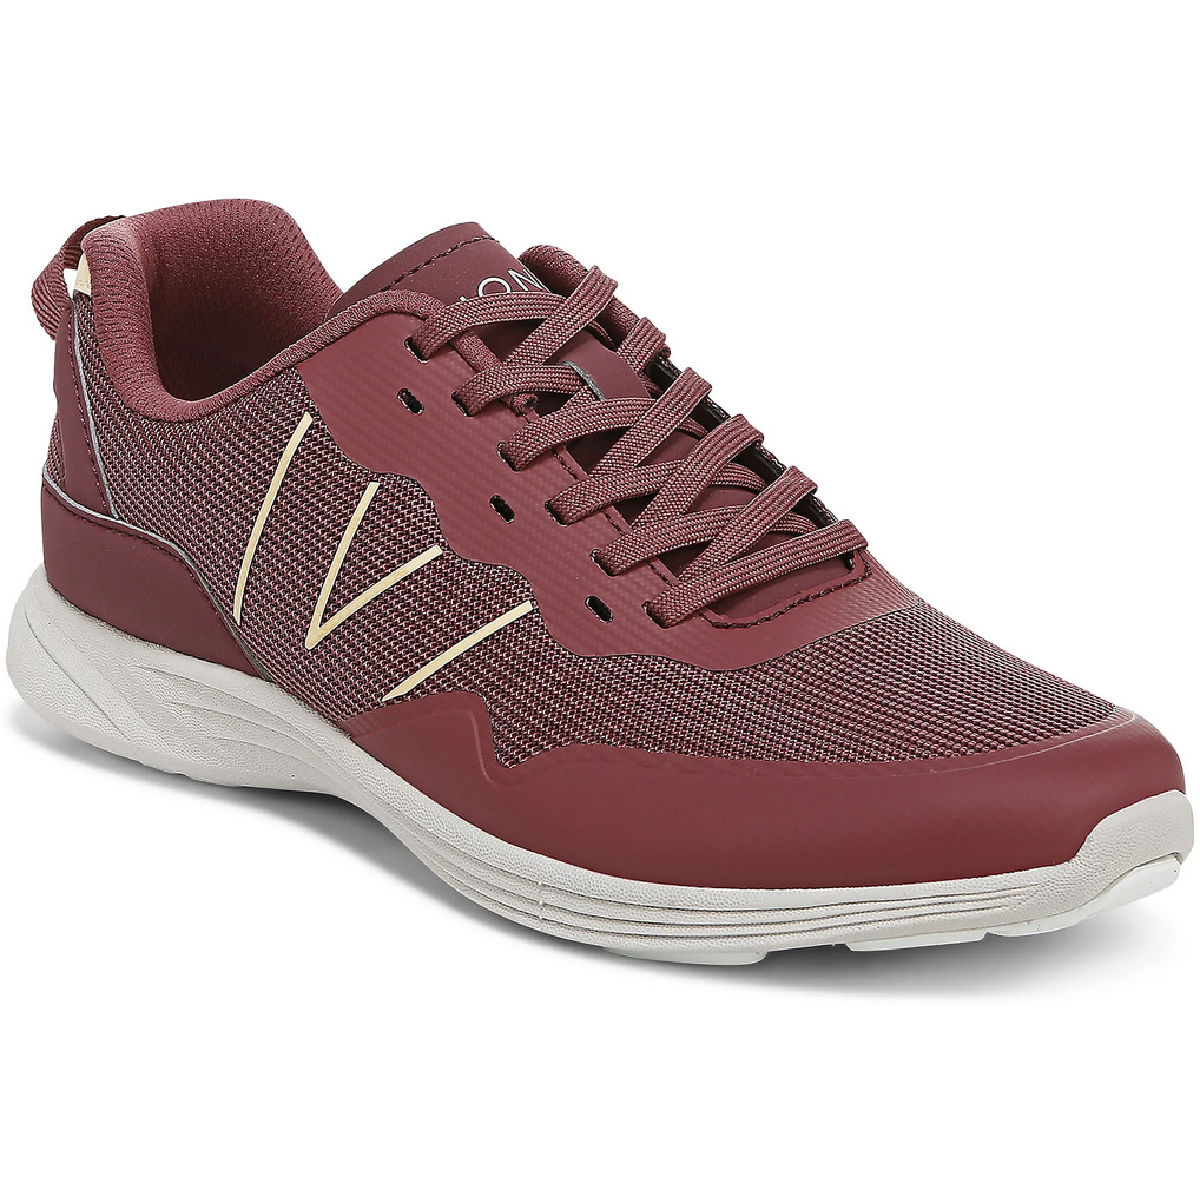 Vionic Audie Lace-Up Women's Athletic Sneakers